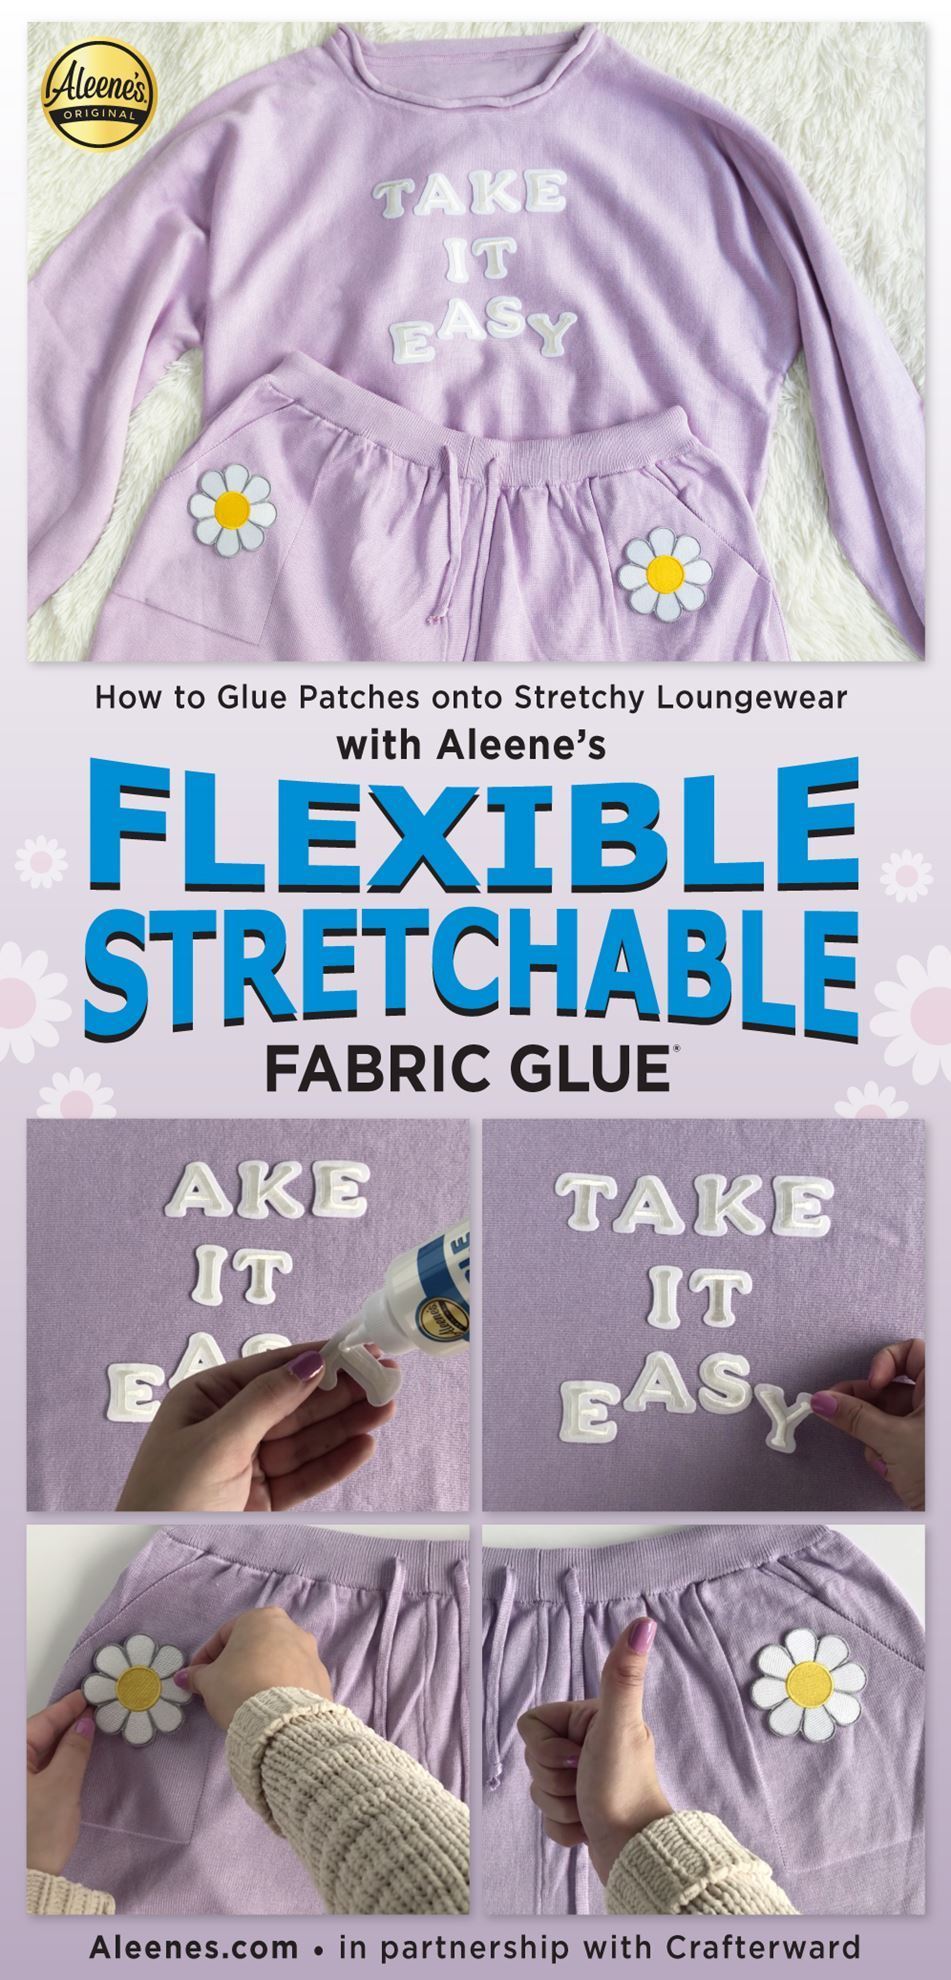 Aleene's Original Glues - How to Glue Patches on Stretchy